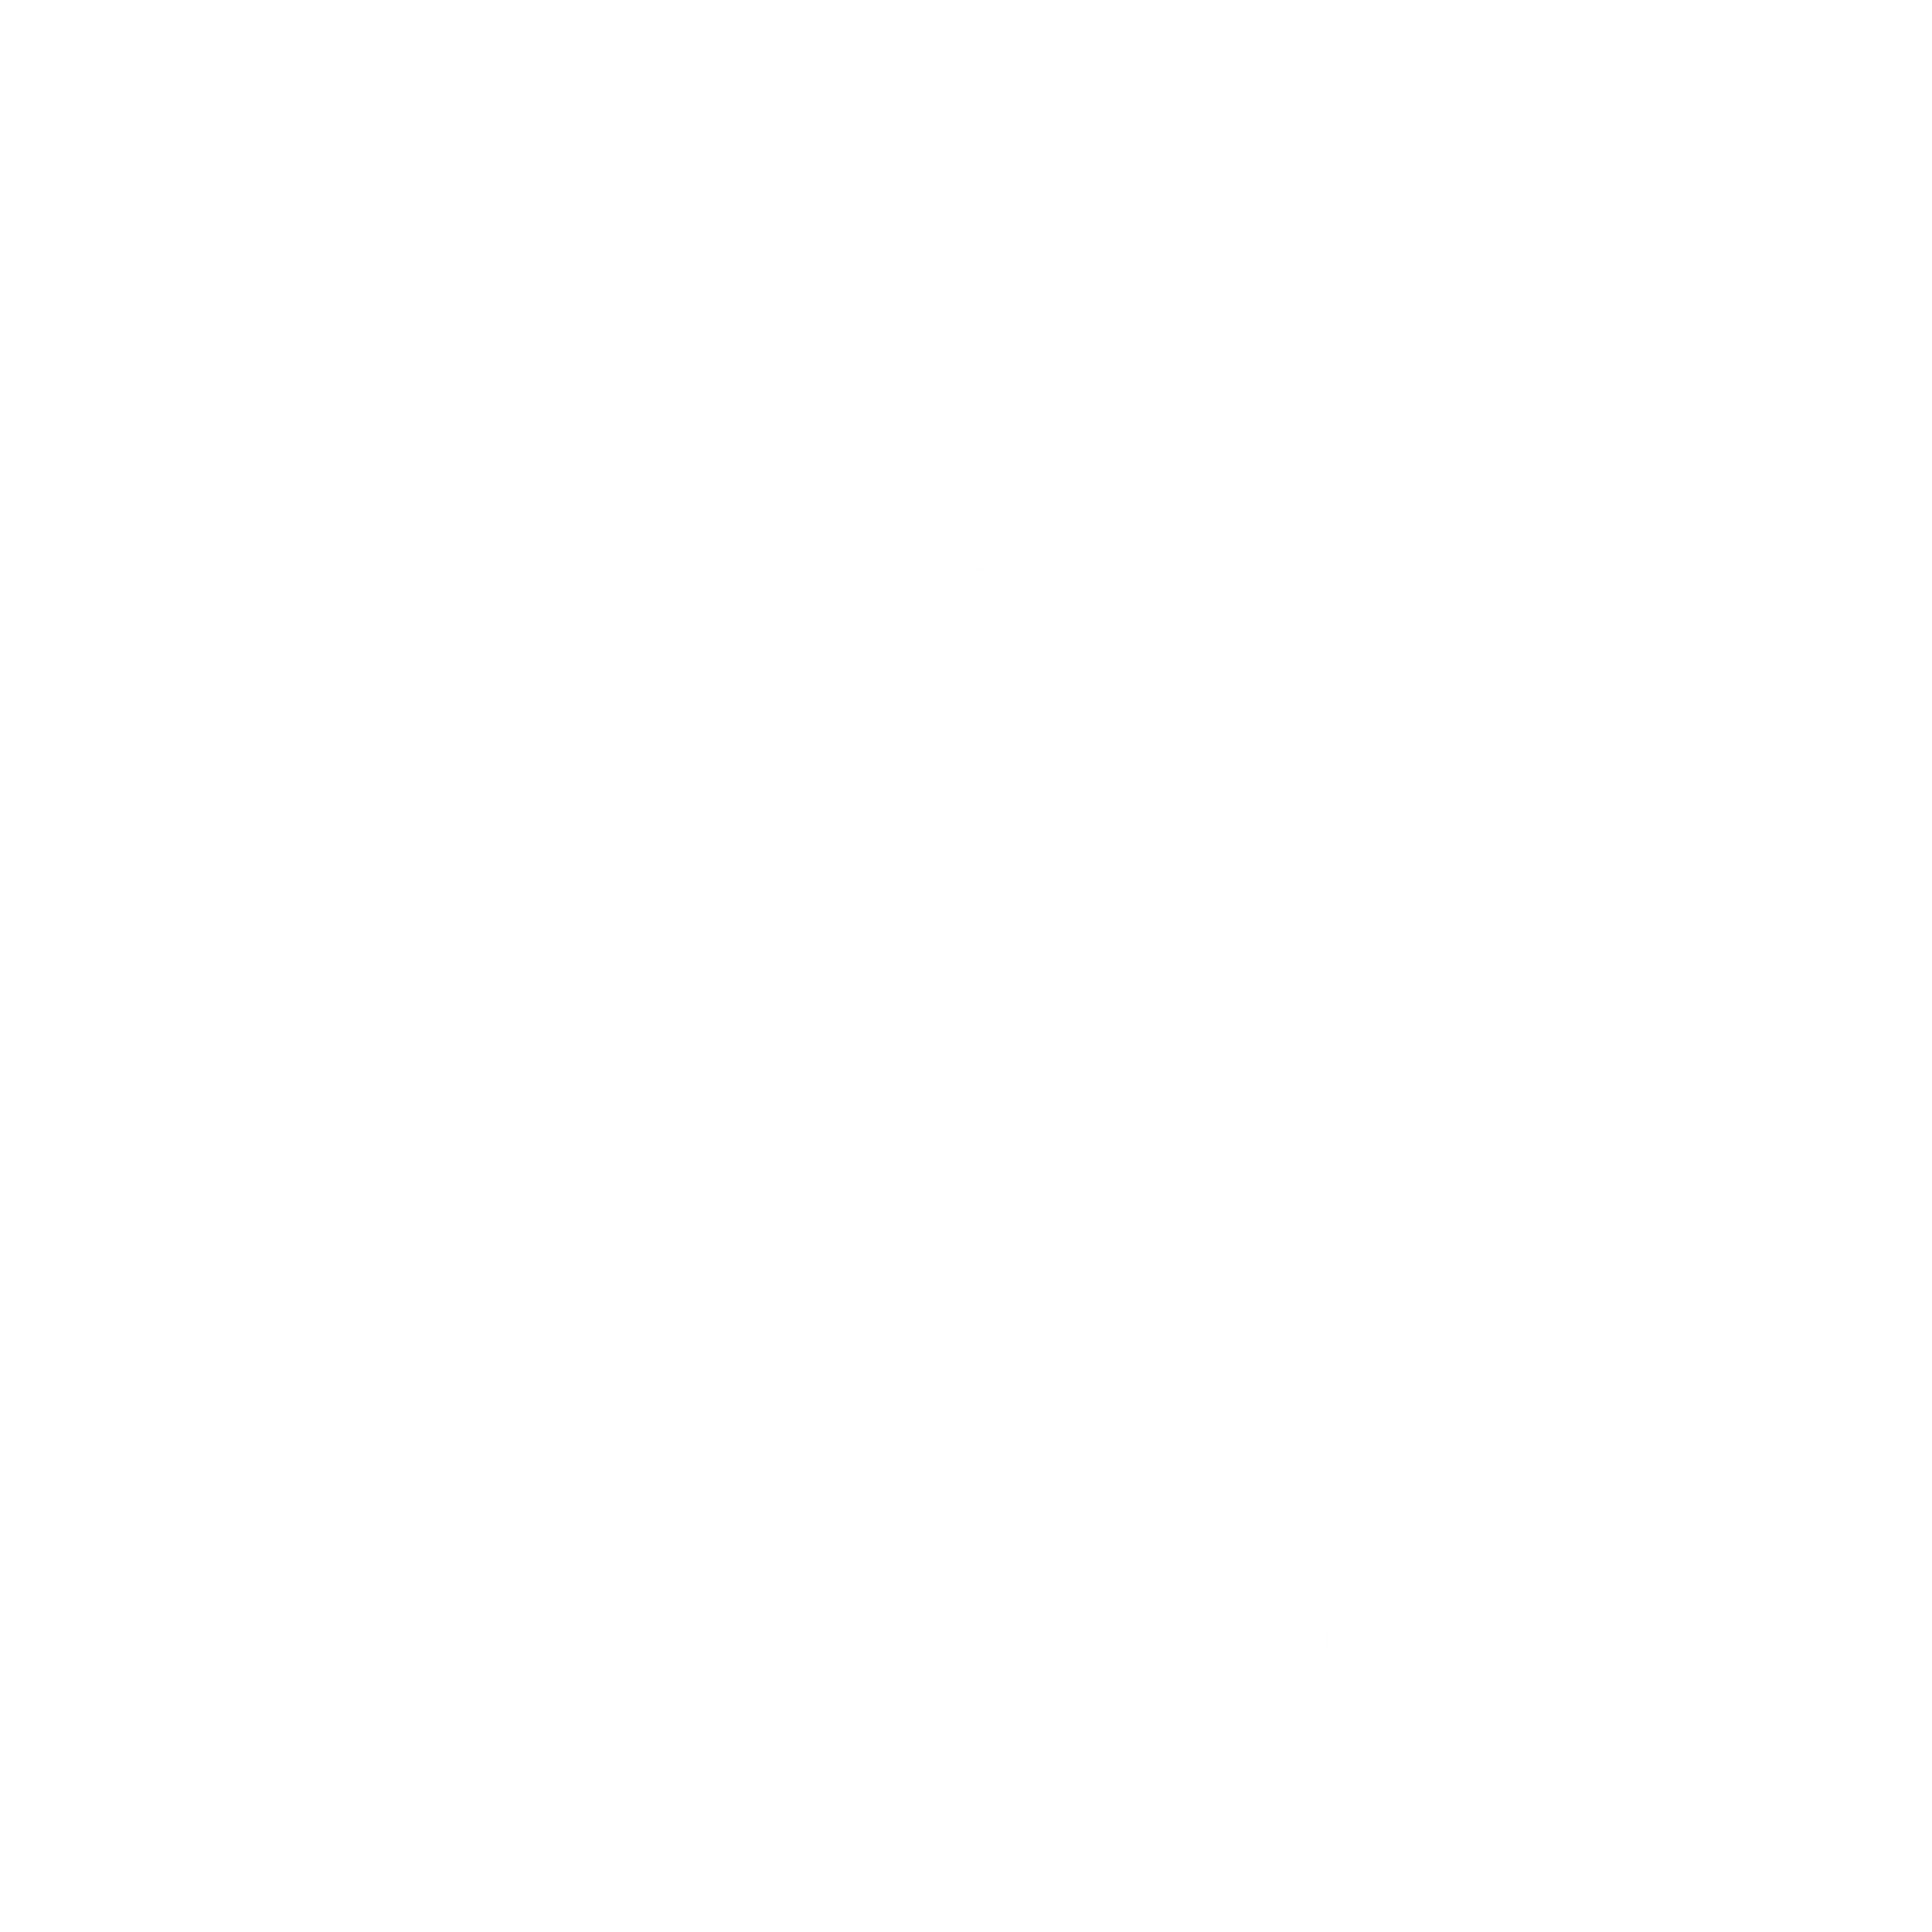 Rock out with your prop out